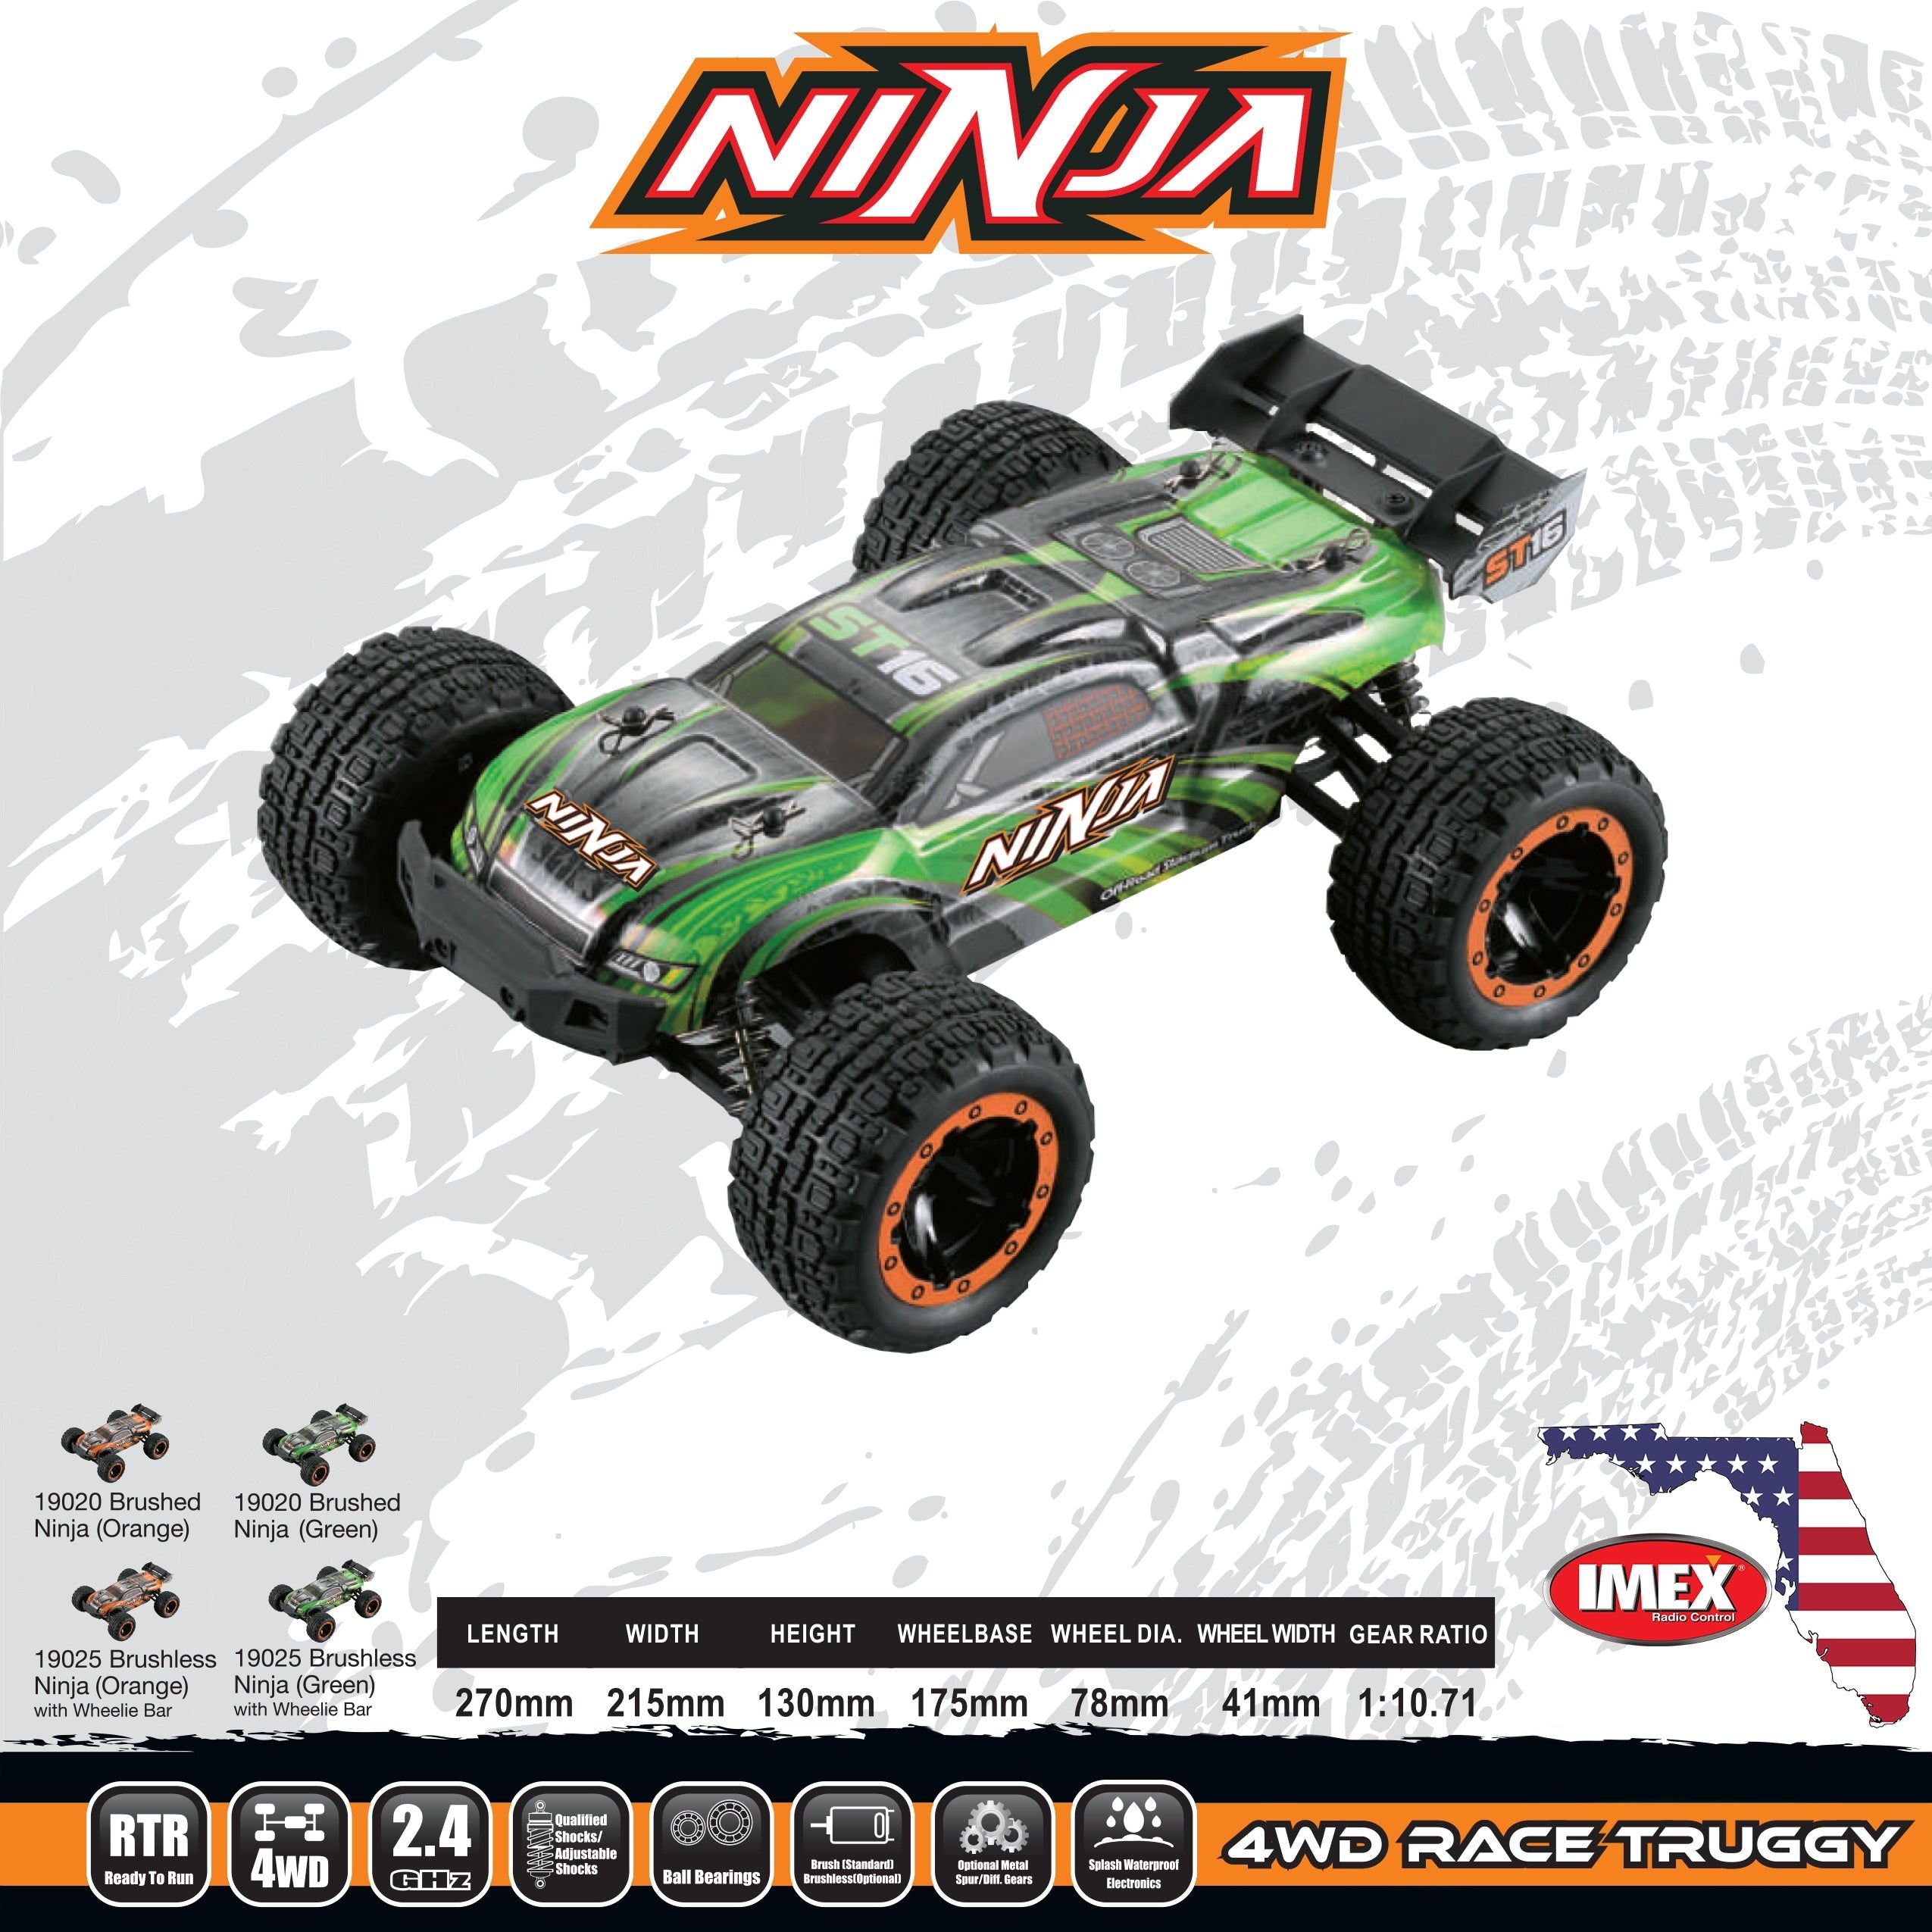 IMEX Ninja 1/16th Scale Brushed RTR 4WD Truggy